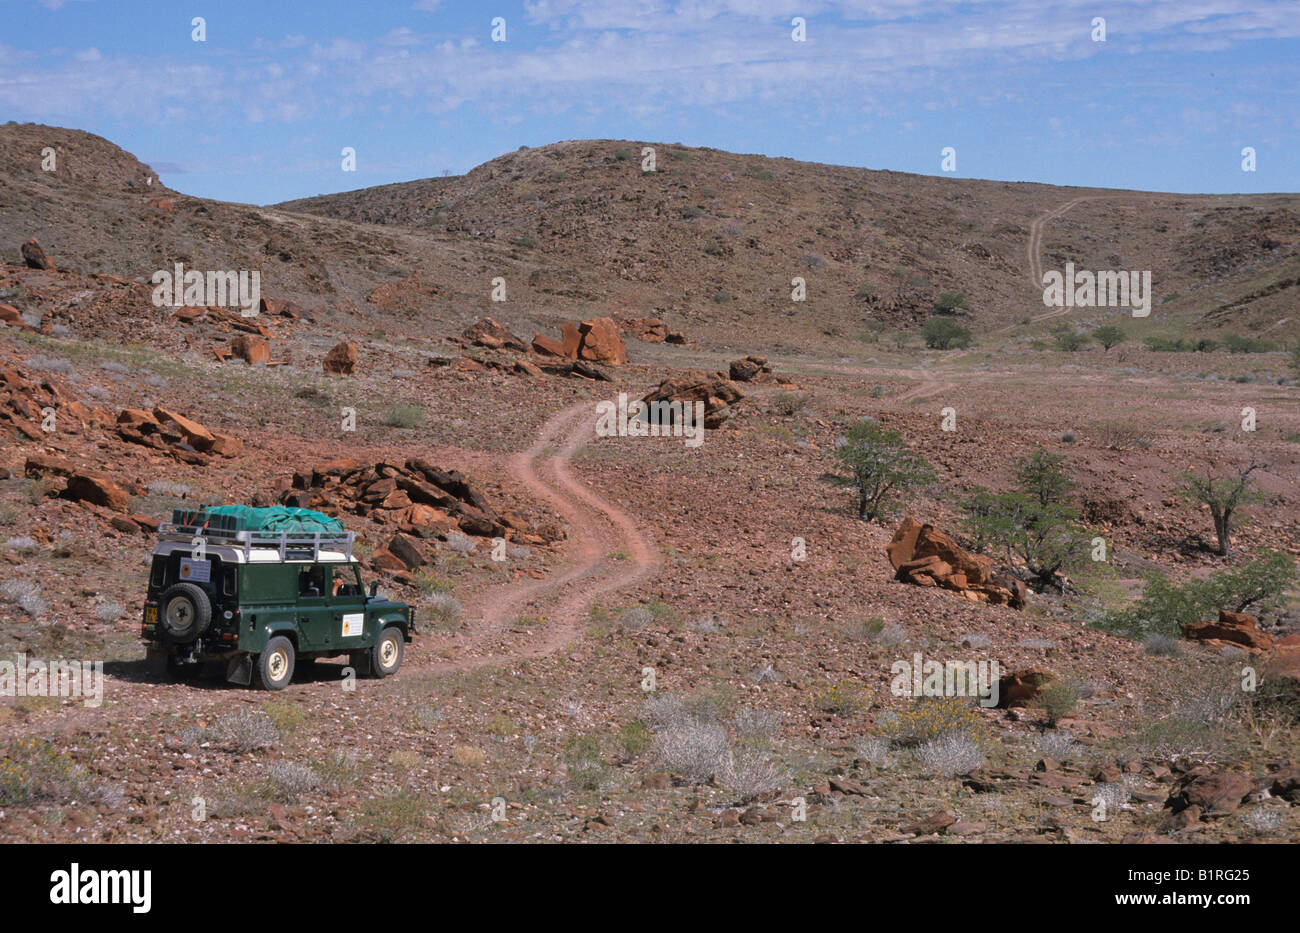 Land Rover in stony desert landscape near the Messum Crater, Namibia, Africa Stock Photo